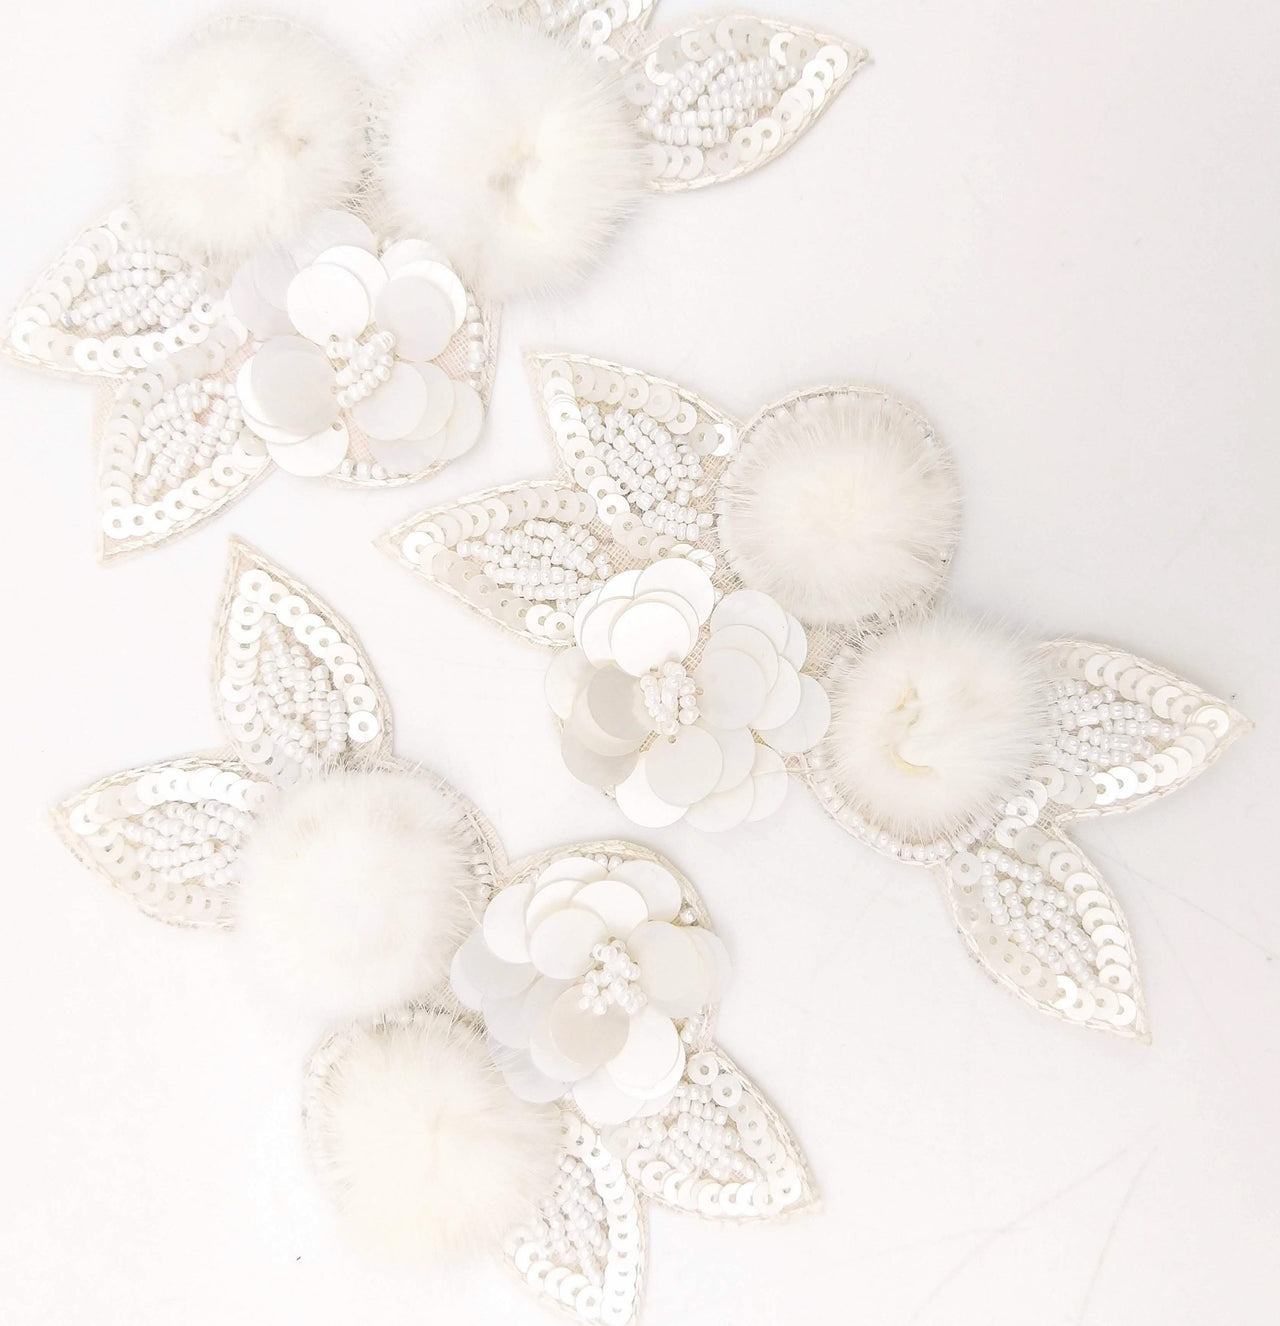 White Hand Embroidered Floral Applique, Beaded and Sequins Applique Wedding Bridal Accessories